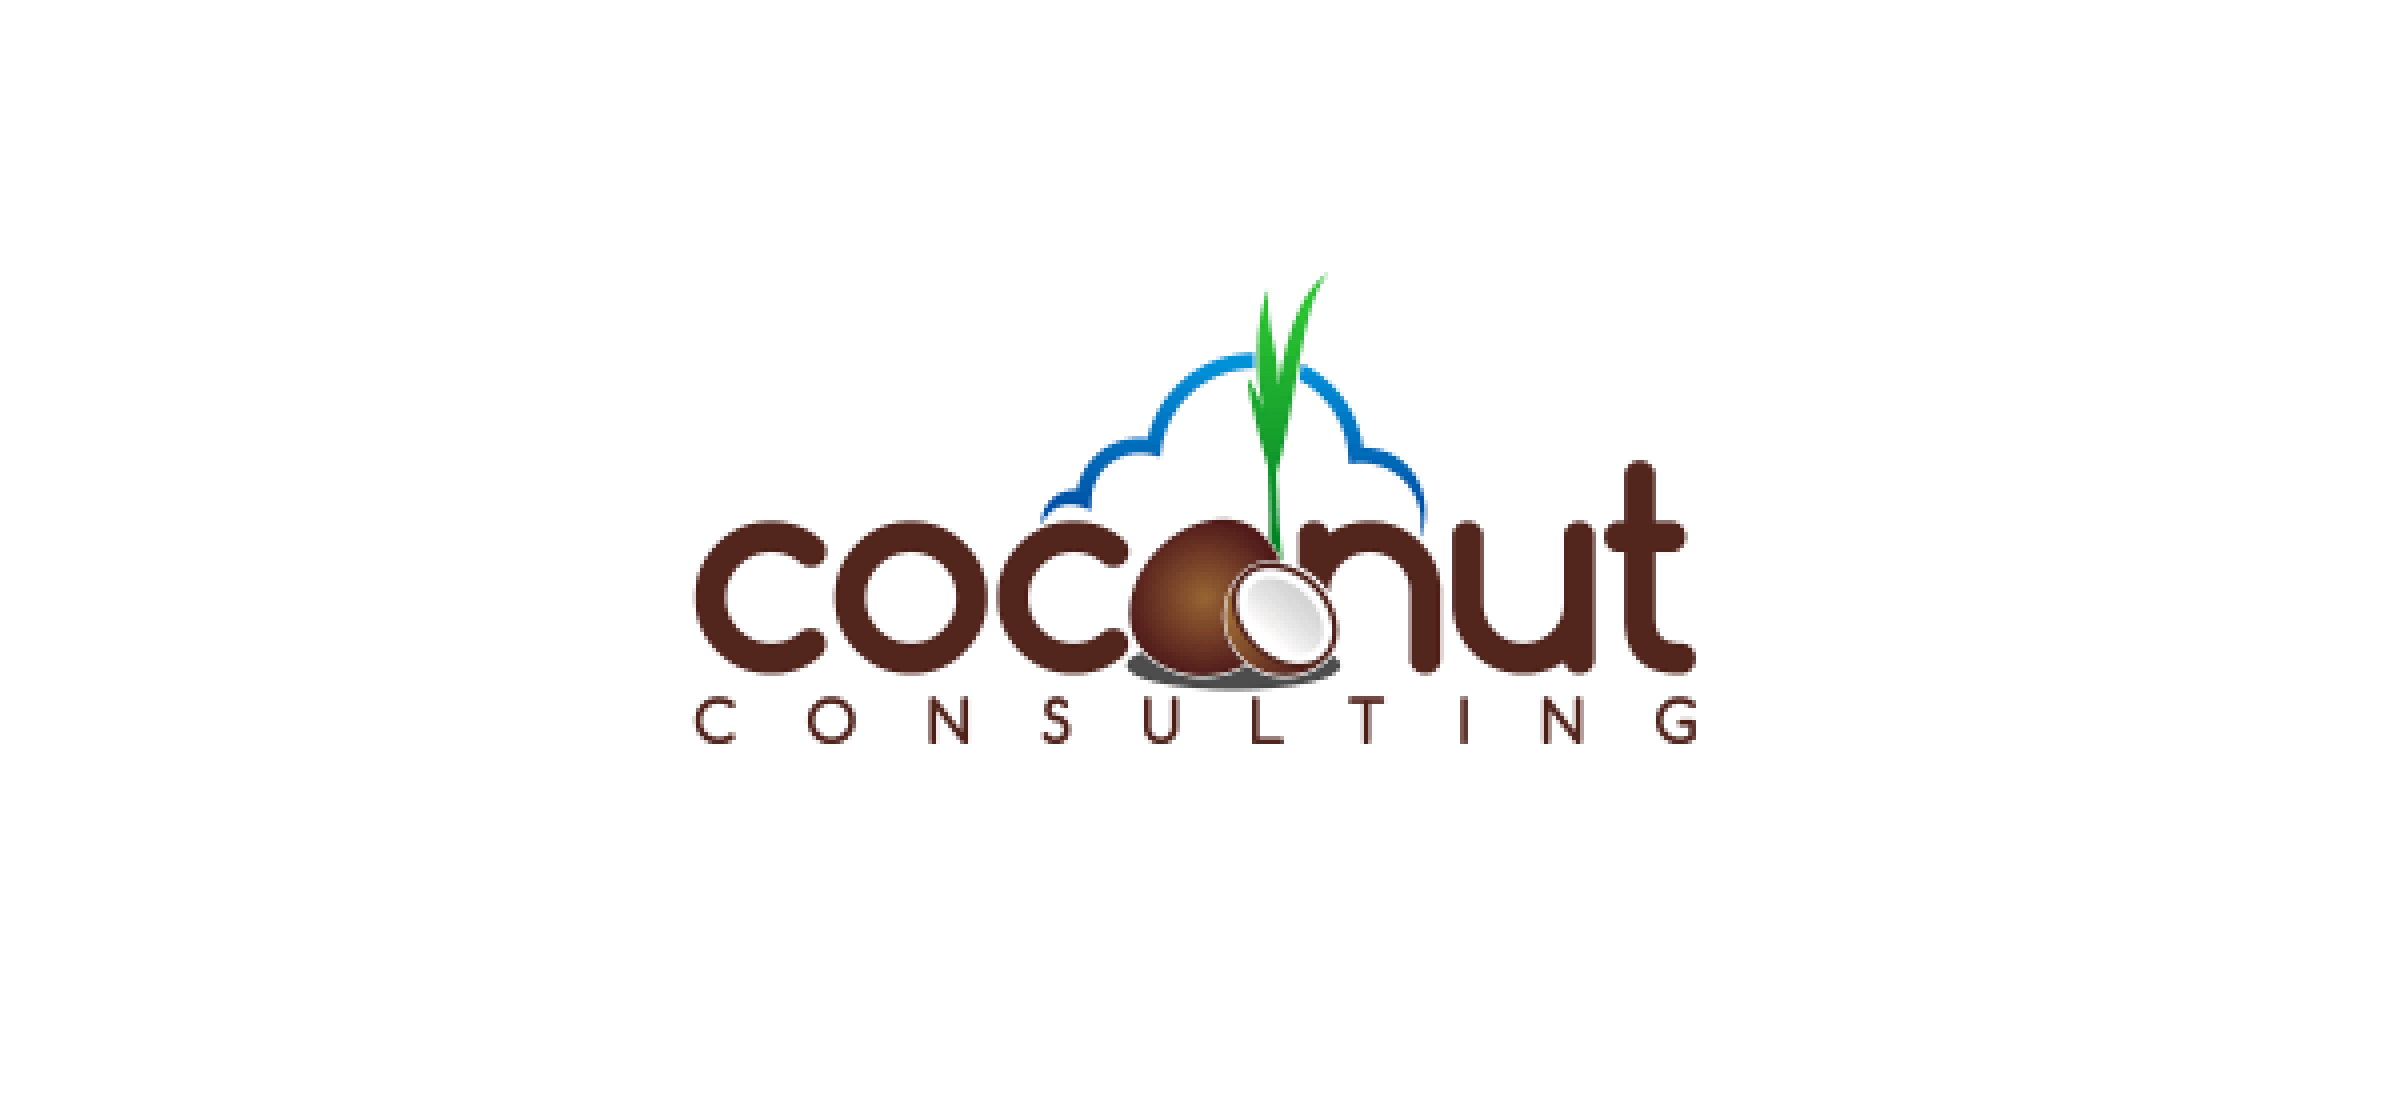 The Coconut Consulting logo